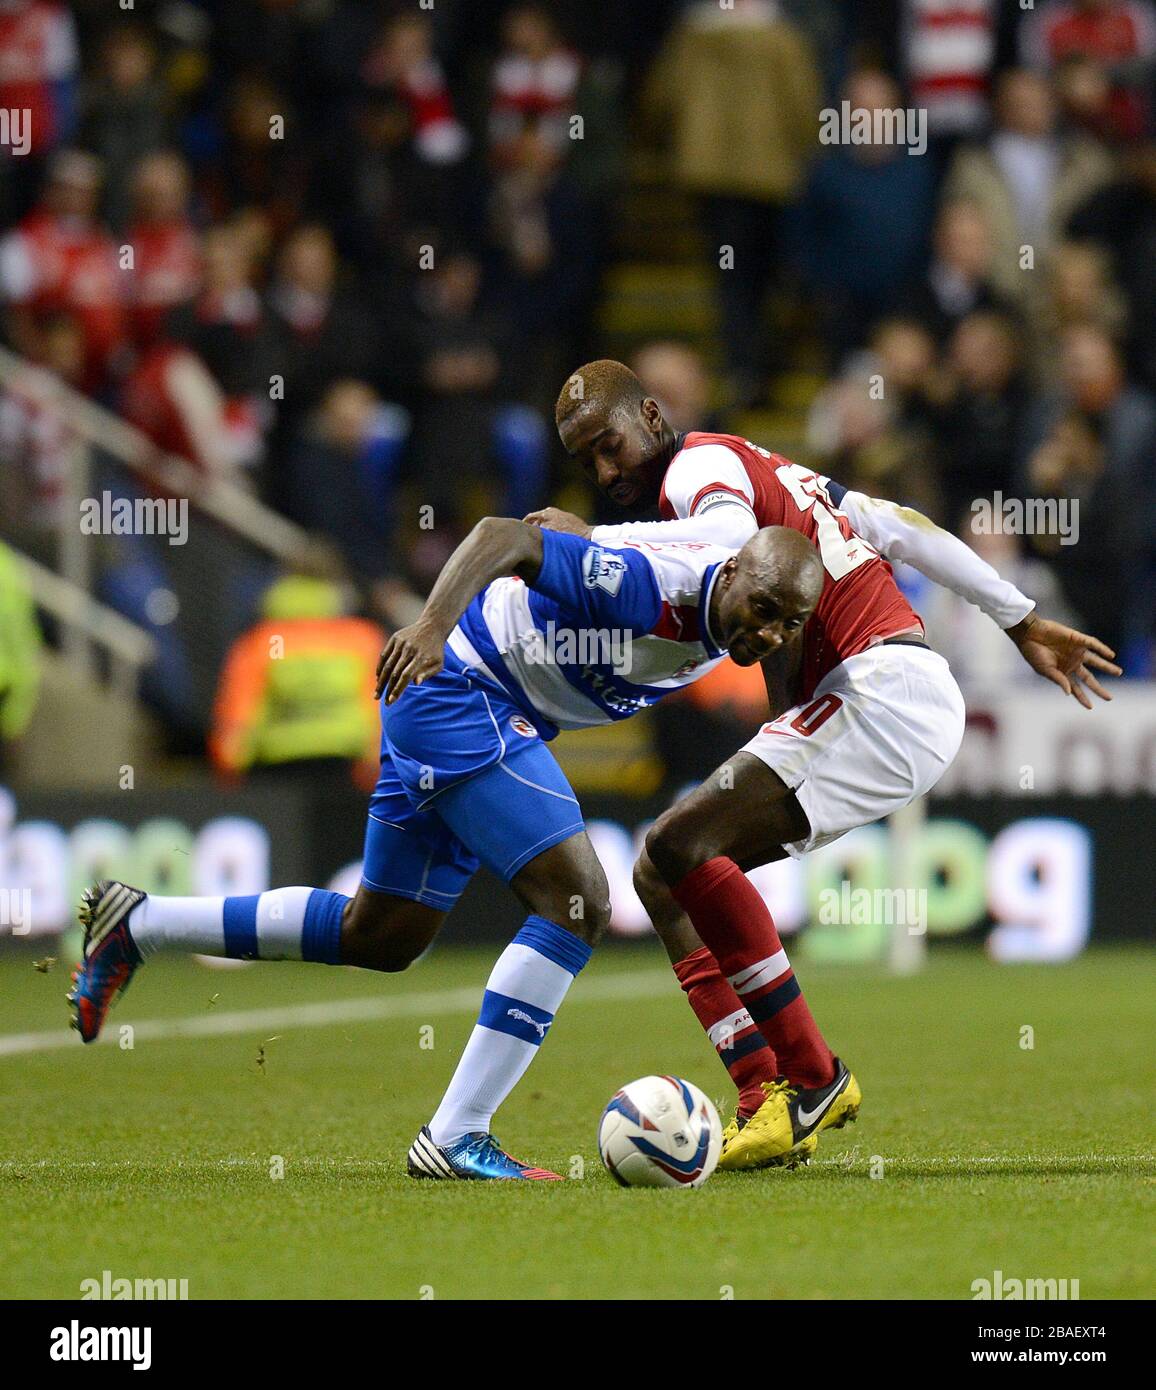 Arsenal's Johan Djourou (right) and Reading's Jason Roberts (left) battle for the ball Stock Photo